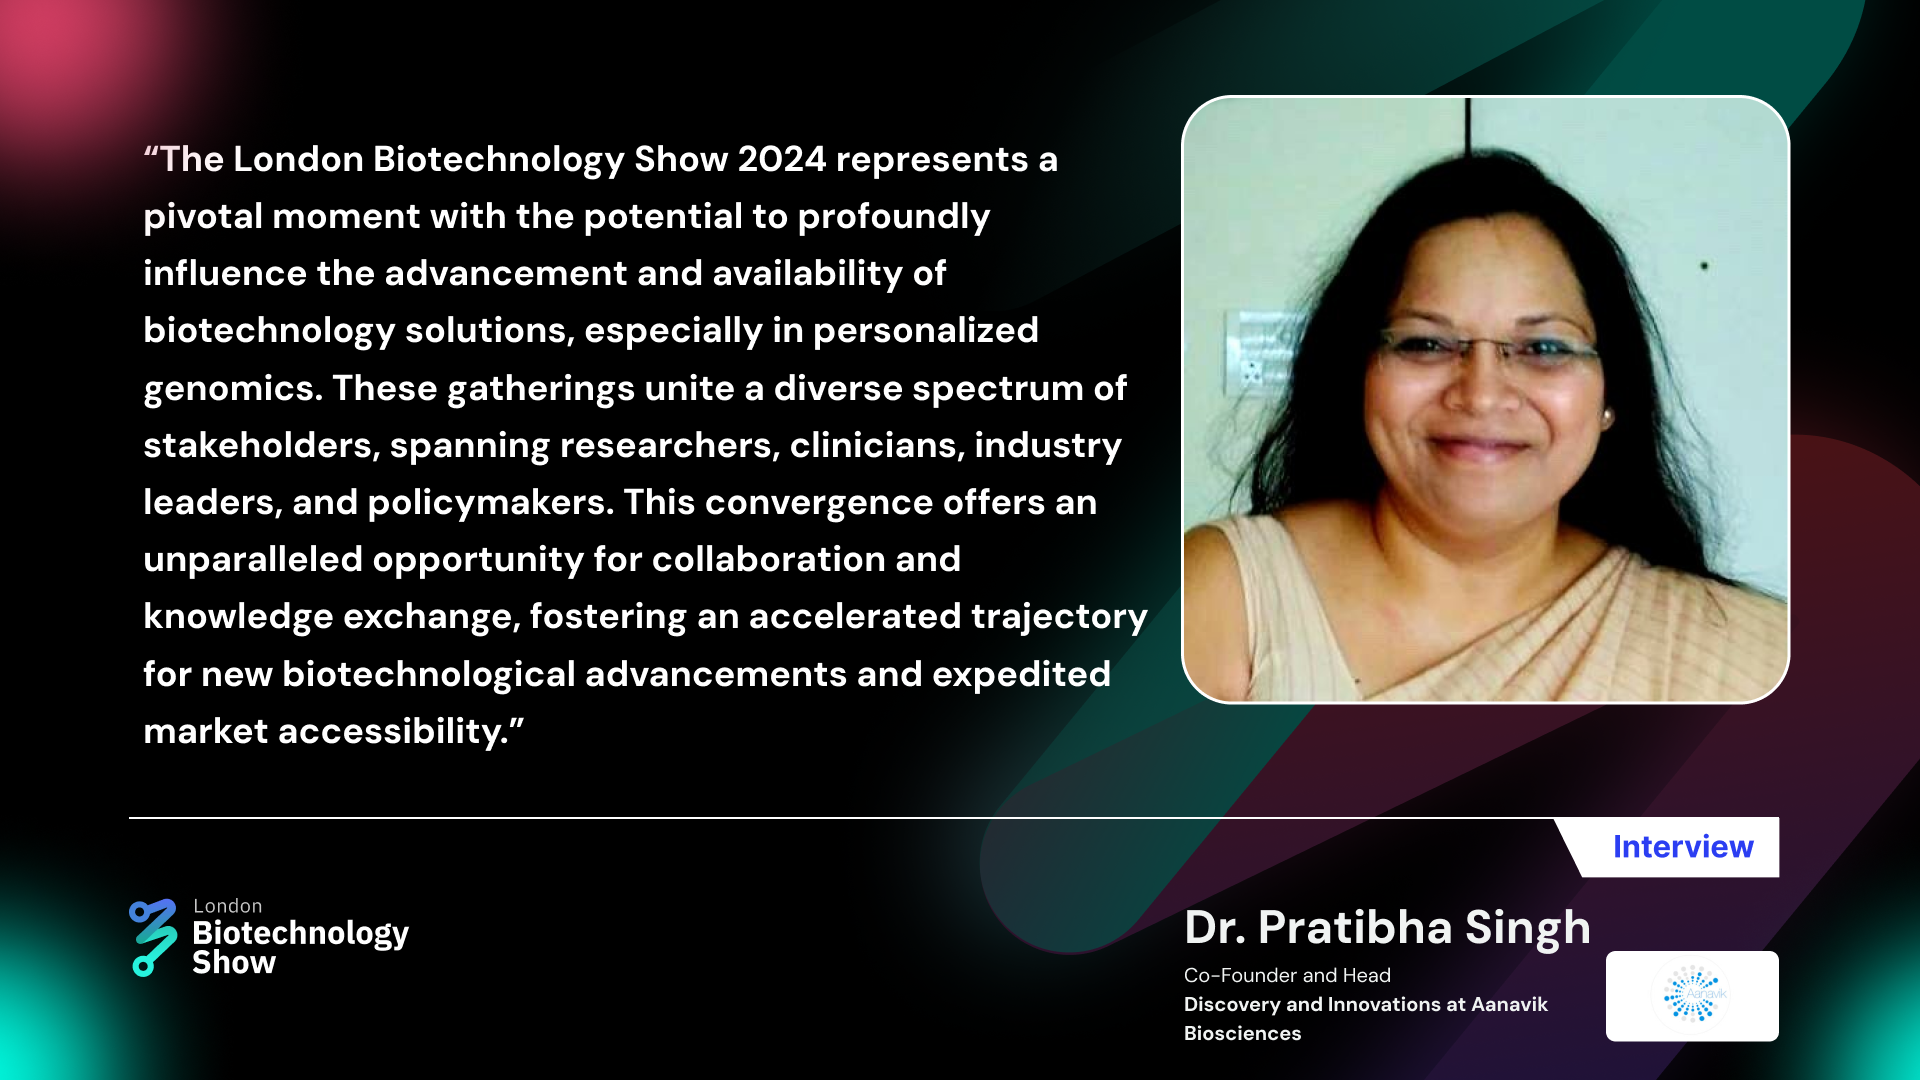 Enlightening Q&A Session with Dr Pratibha Singh, Co-Founder and Head of Discovery and Innovations at Aanavik Biosciences